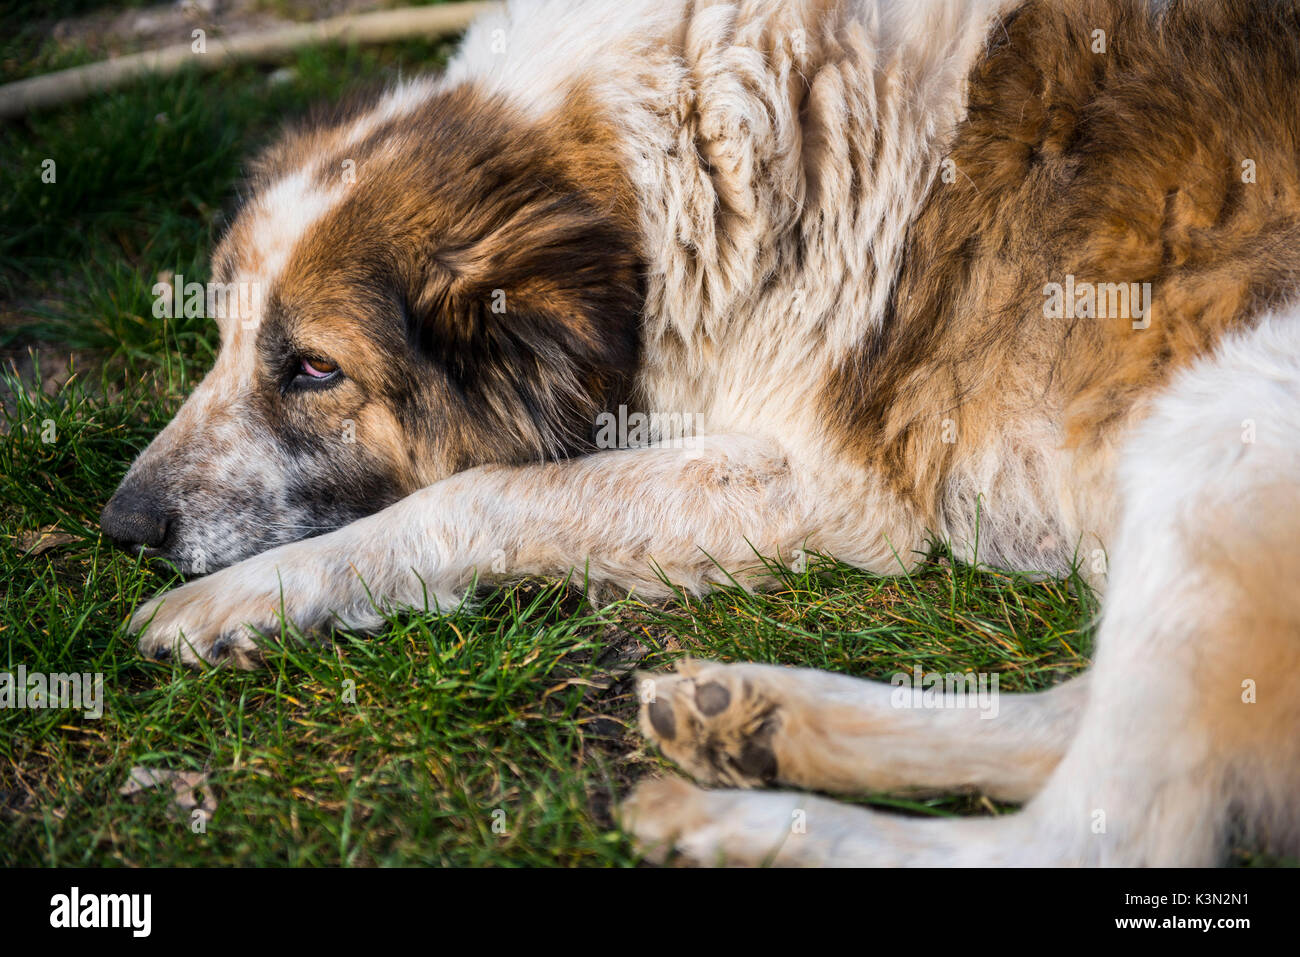 Italy, Tuscany, White and brown fur dog relaxing on a dirt road Stock Photo